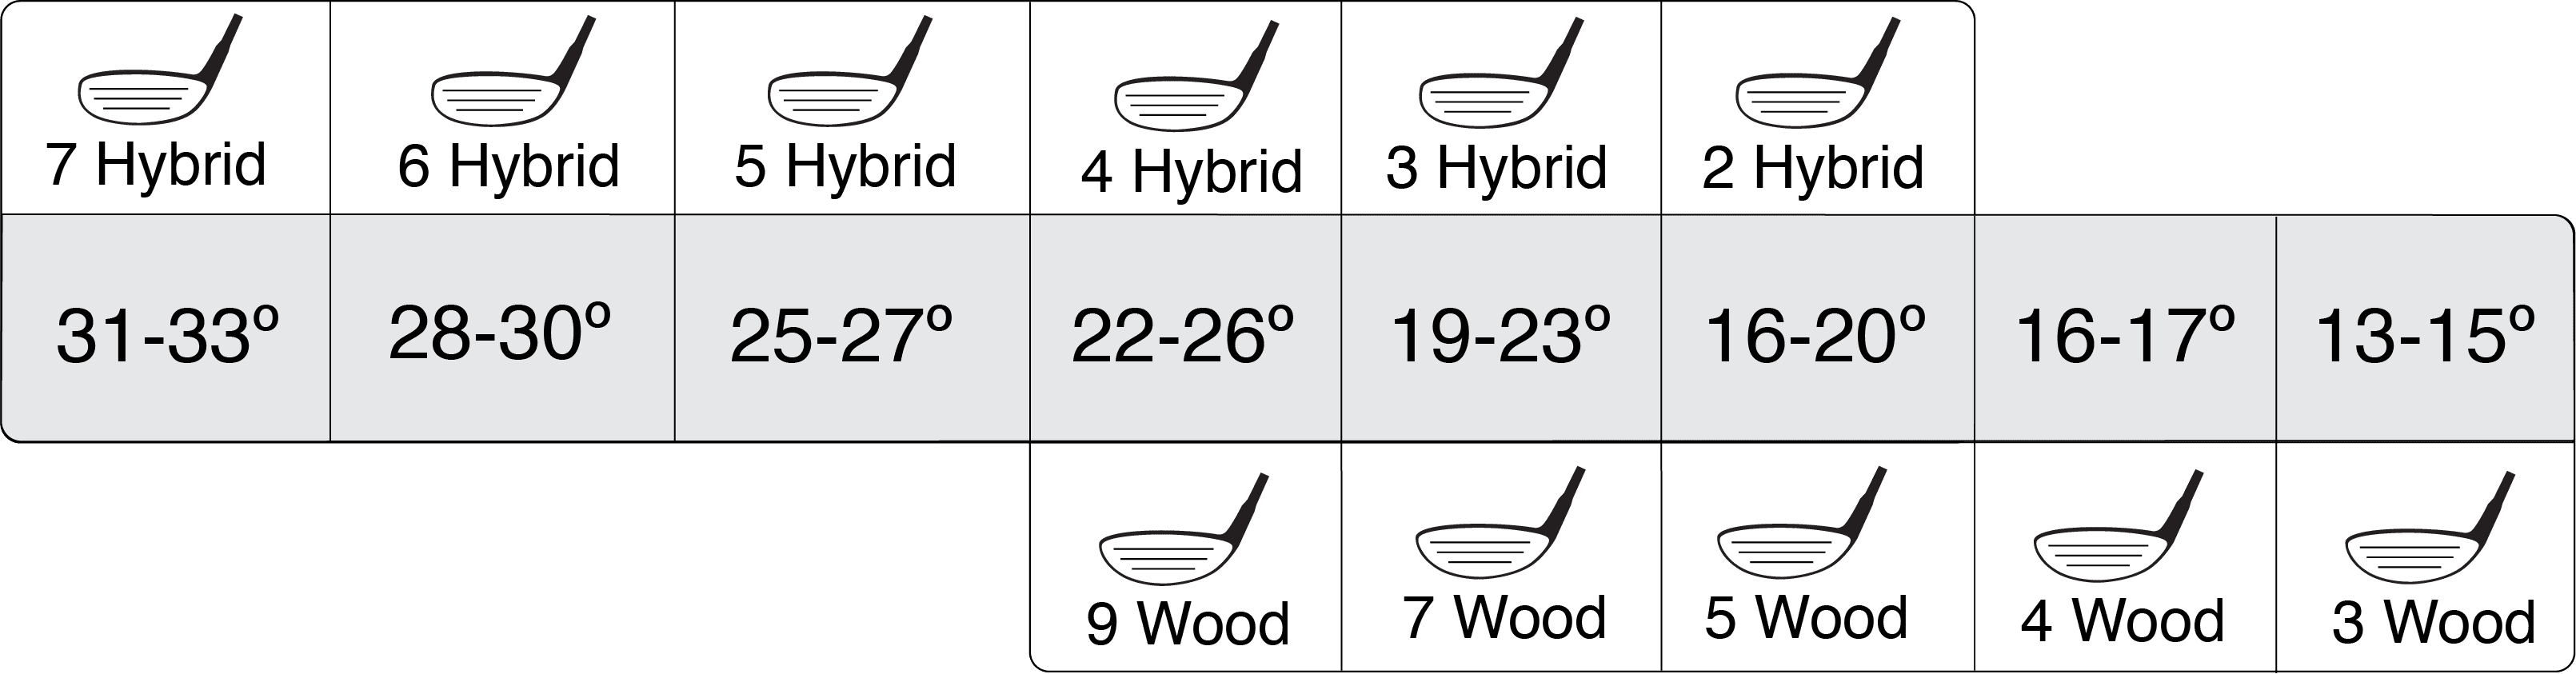 Driver Loft And Distance Chart